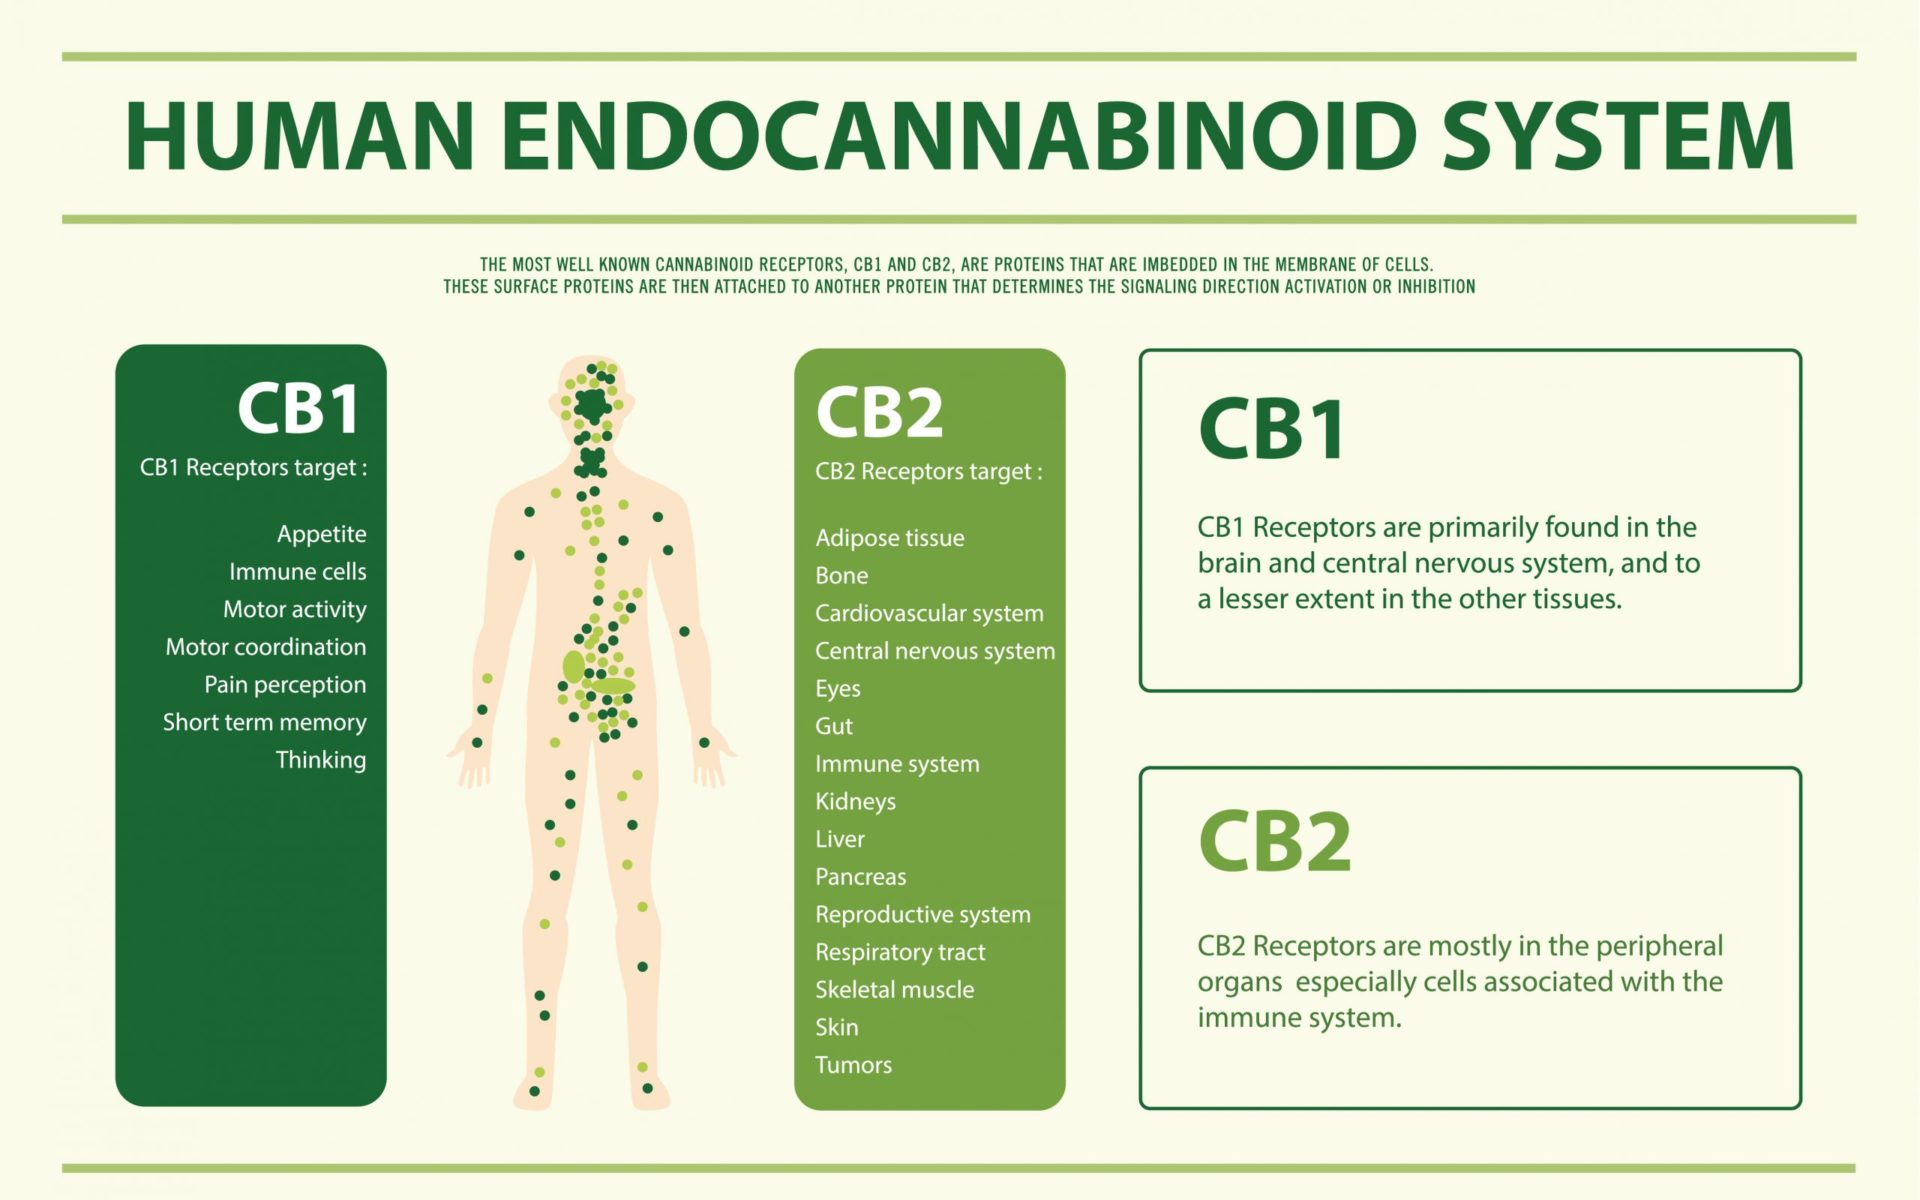 An infographic of the human endocannabinoid system